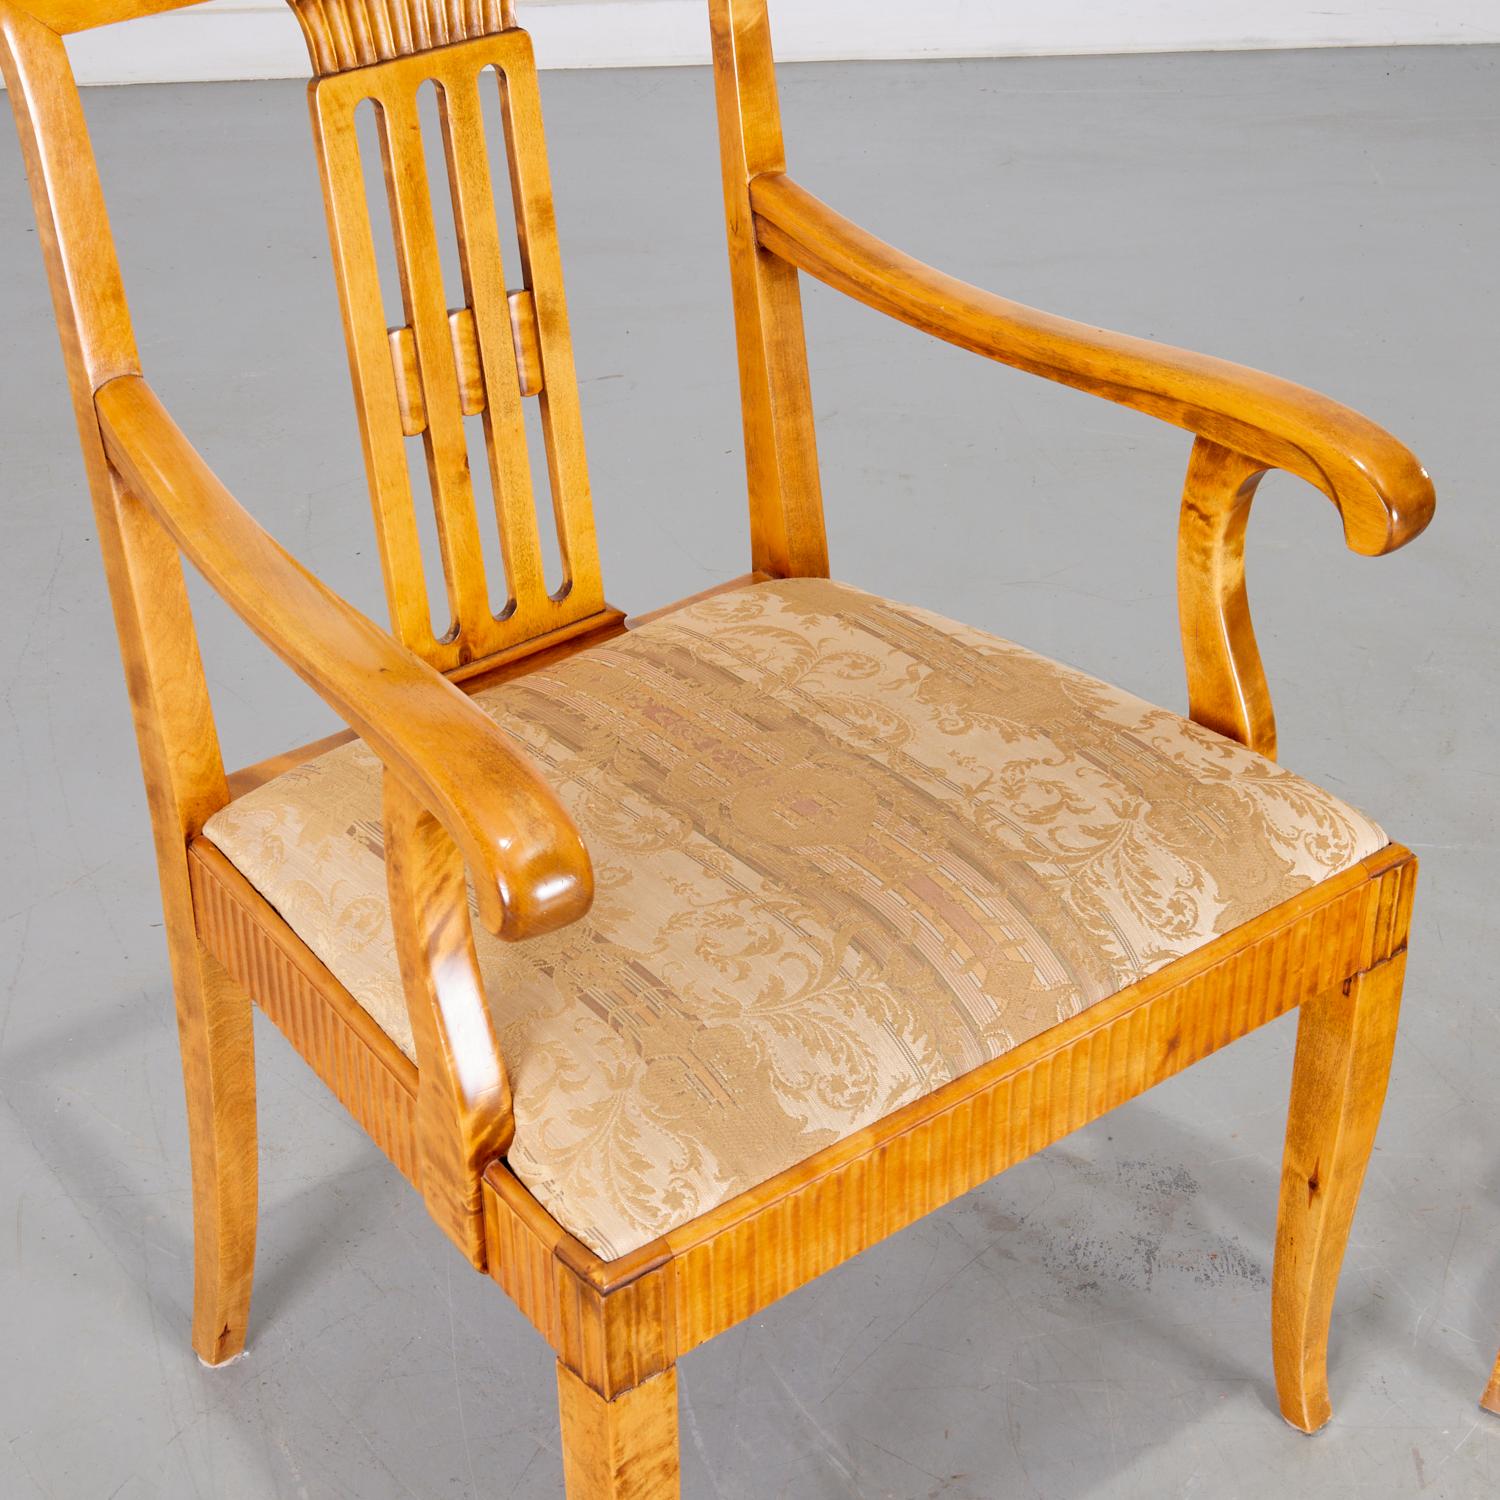 20th c., Swedish Neoclassical birch armchairs with pale damask upholstered seats, unmarked. These chairs are simply lovely. The sinuous lines of the arms and the crisp carved details on the back splat and around the seat result in a pleasing